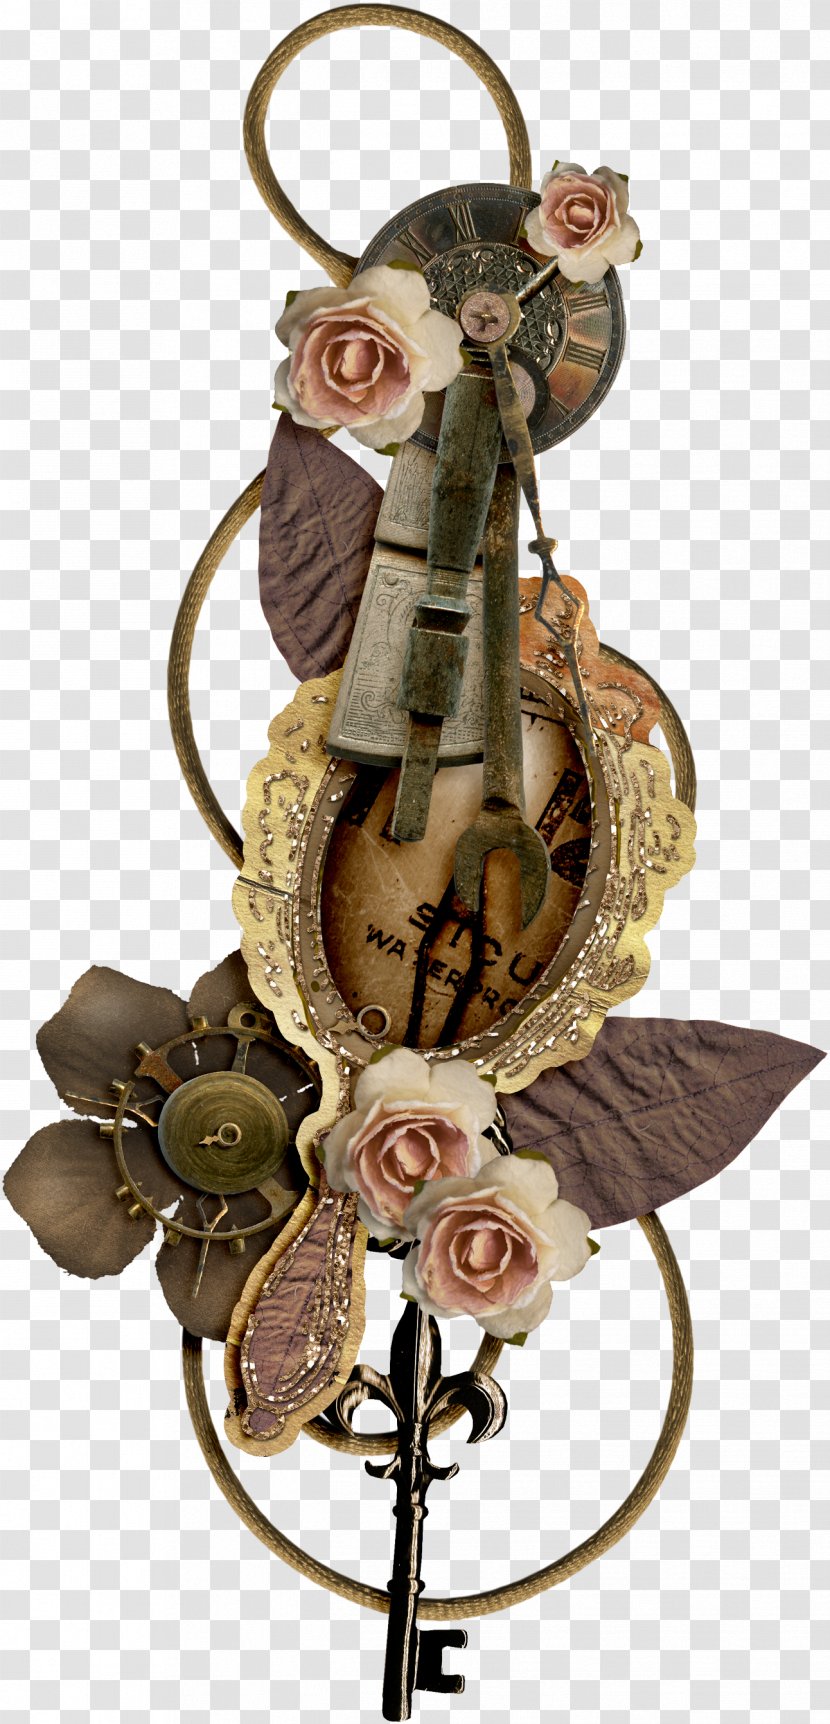 Animation - Metal - Steampunk Gear Transparent PNG